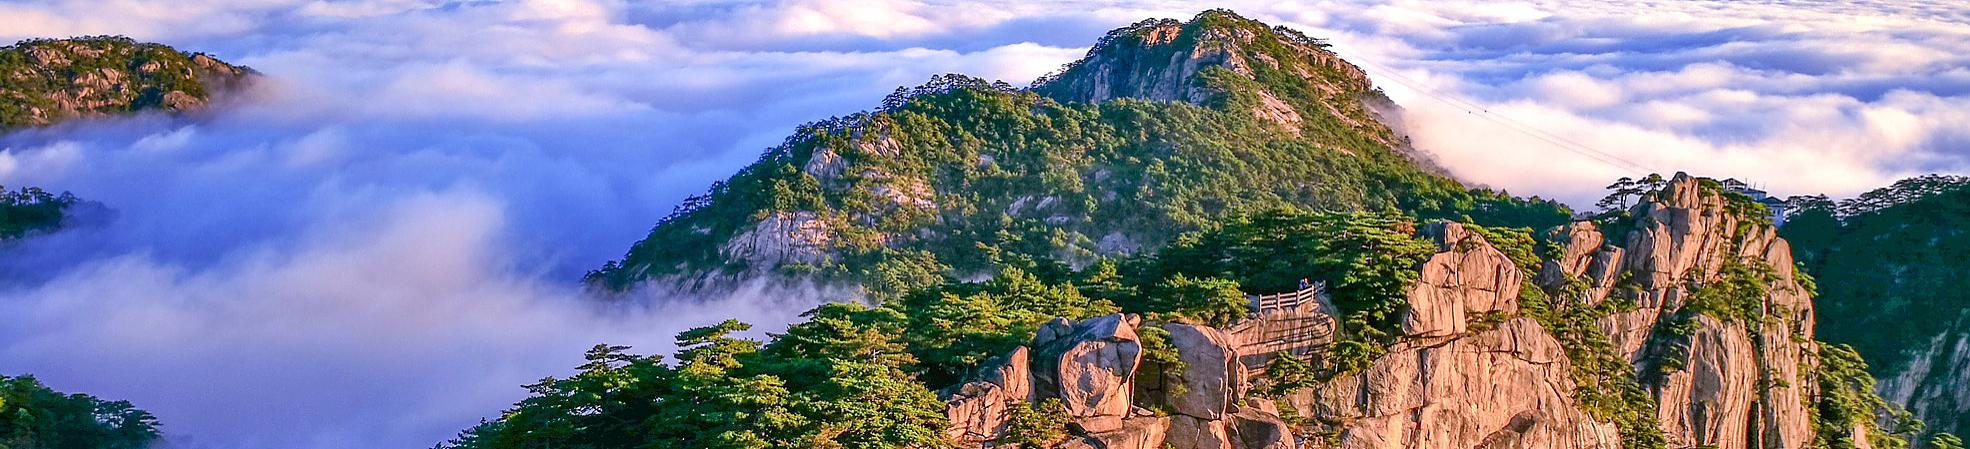 Huangshan Attractions 